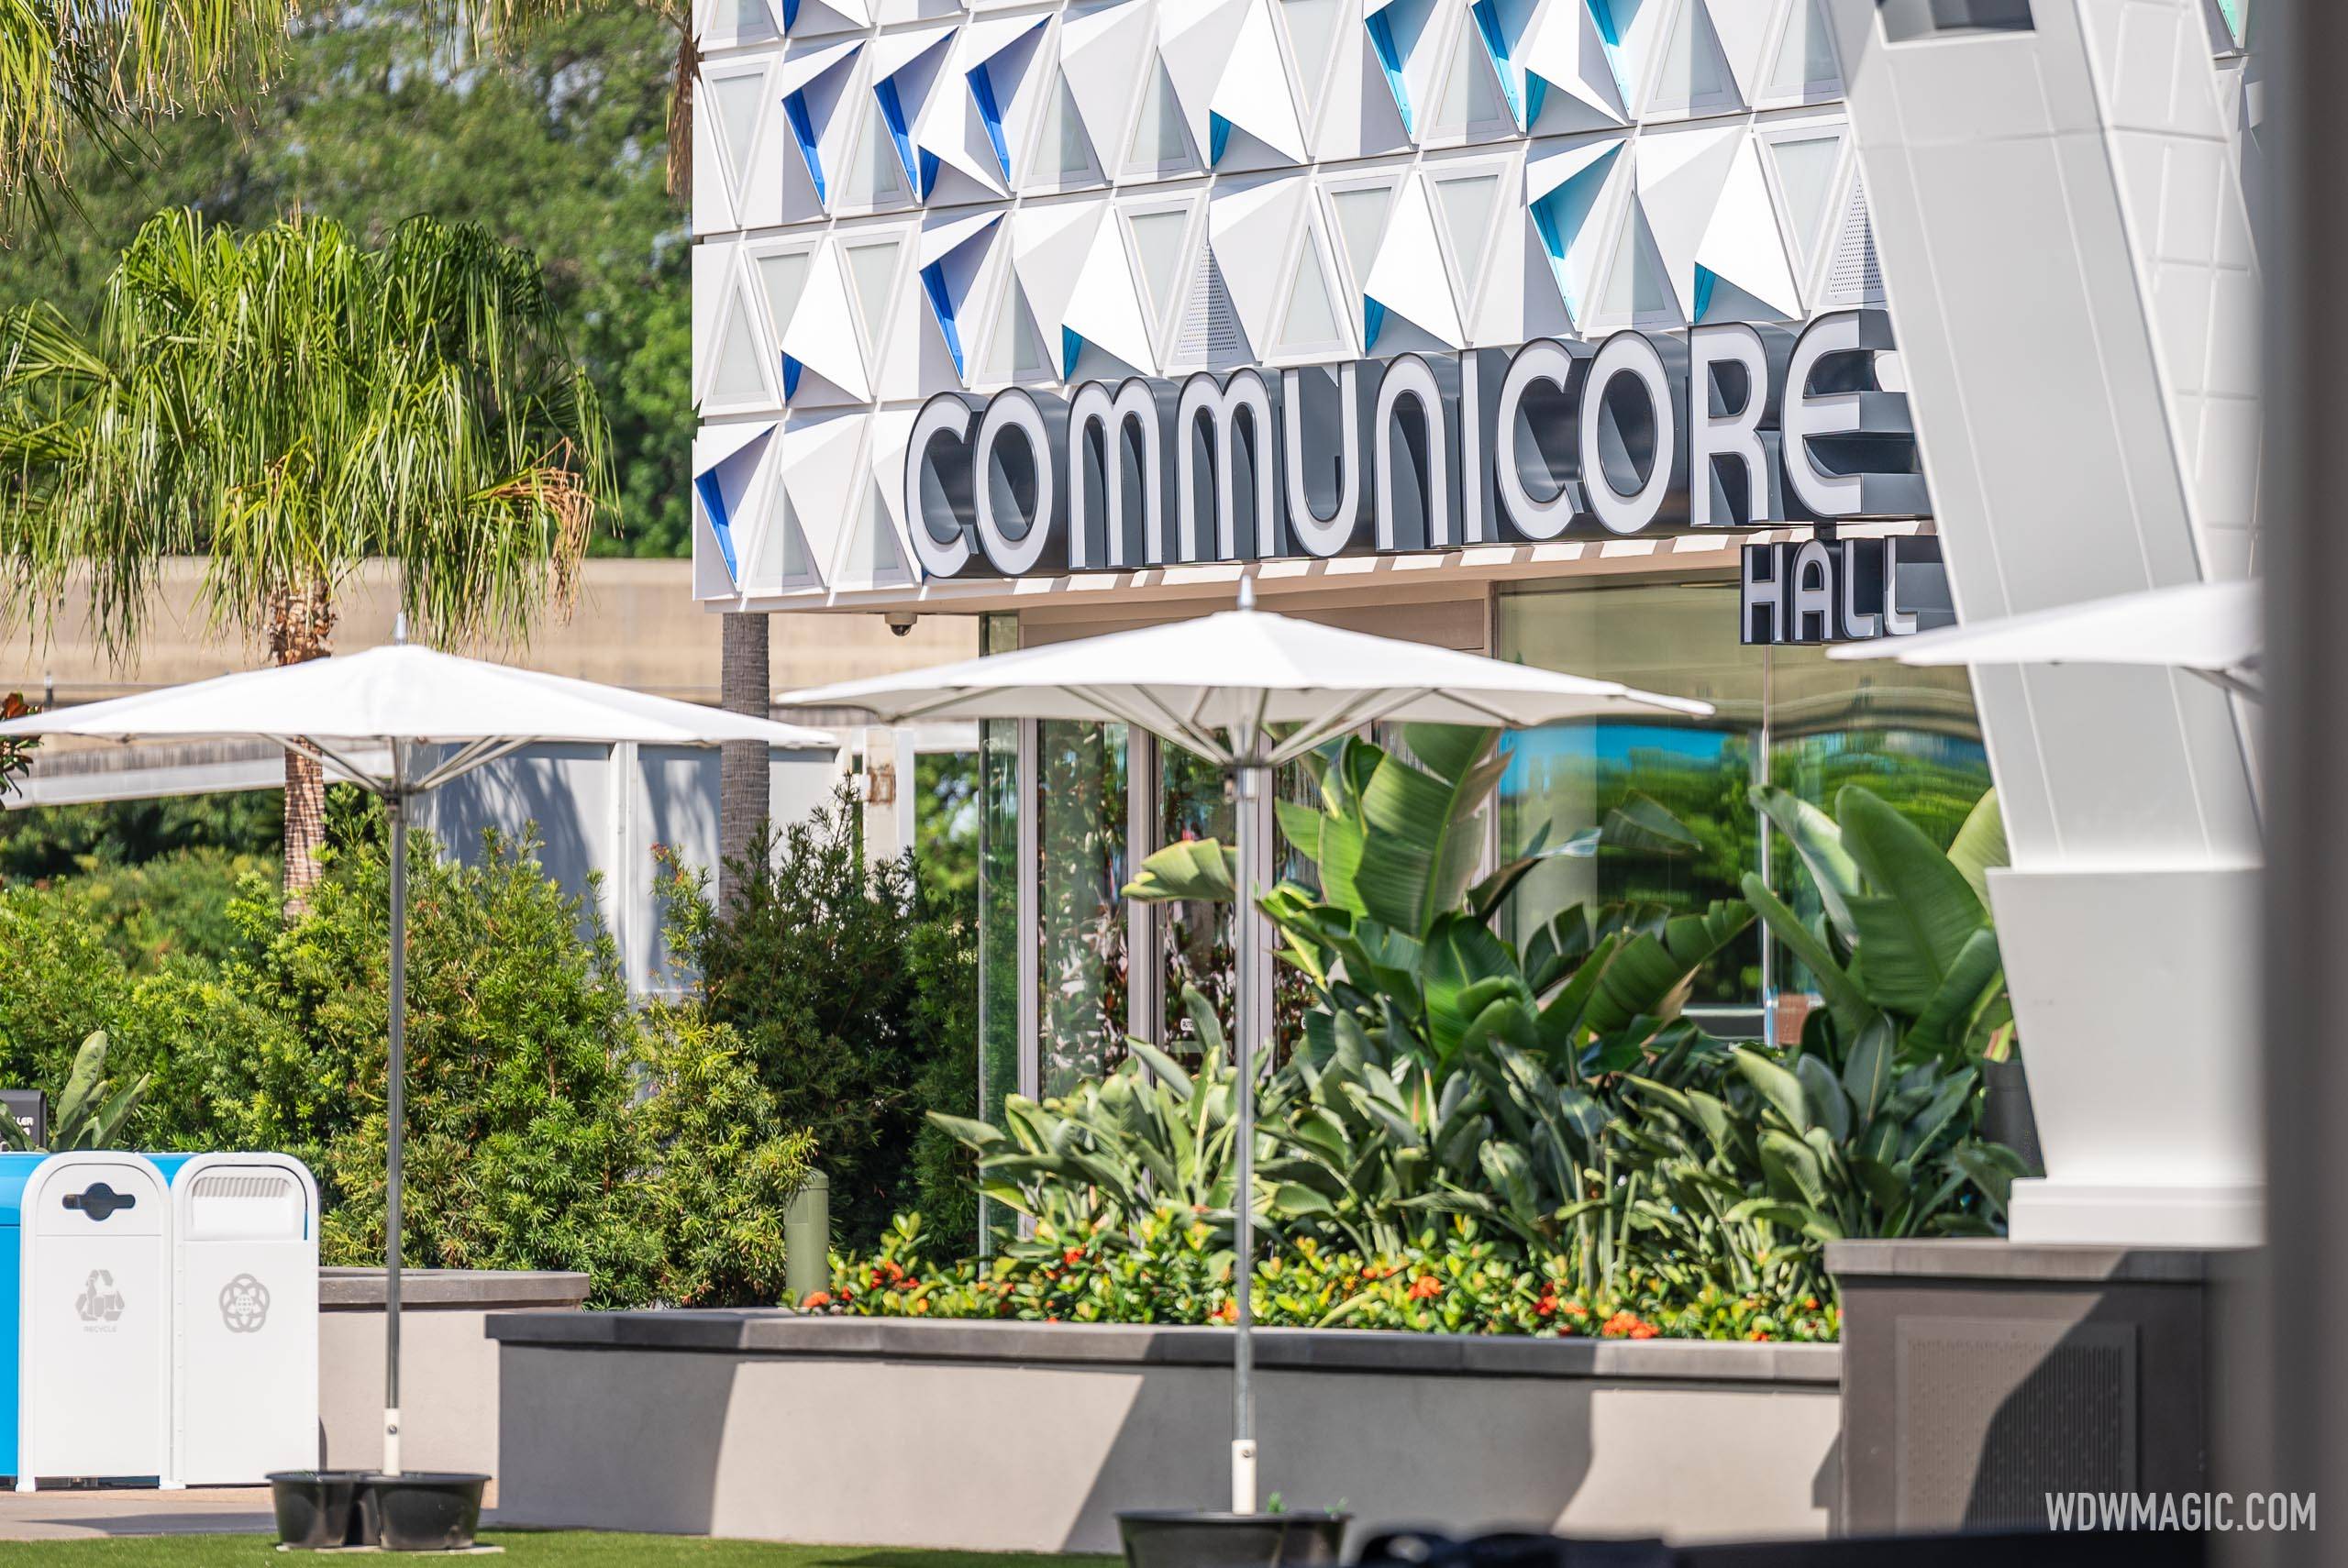 EPCOT's CommuniCore Plaza and Hall: All Construction Walls Down for Grand Opening